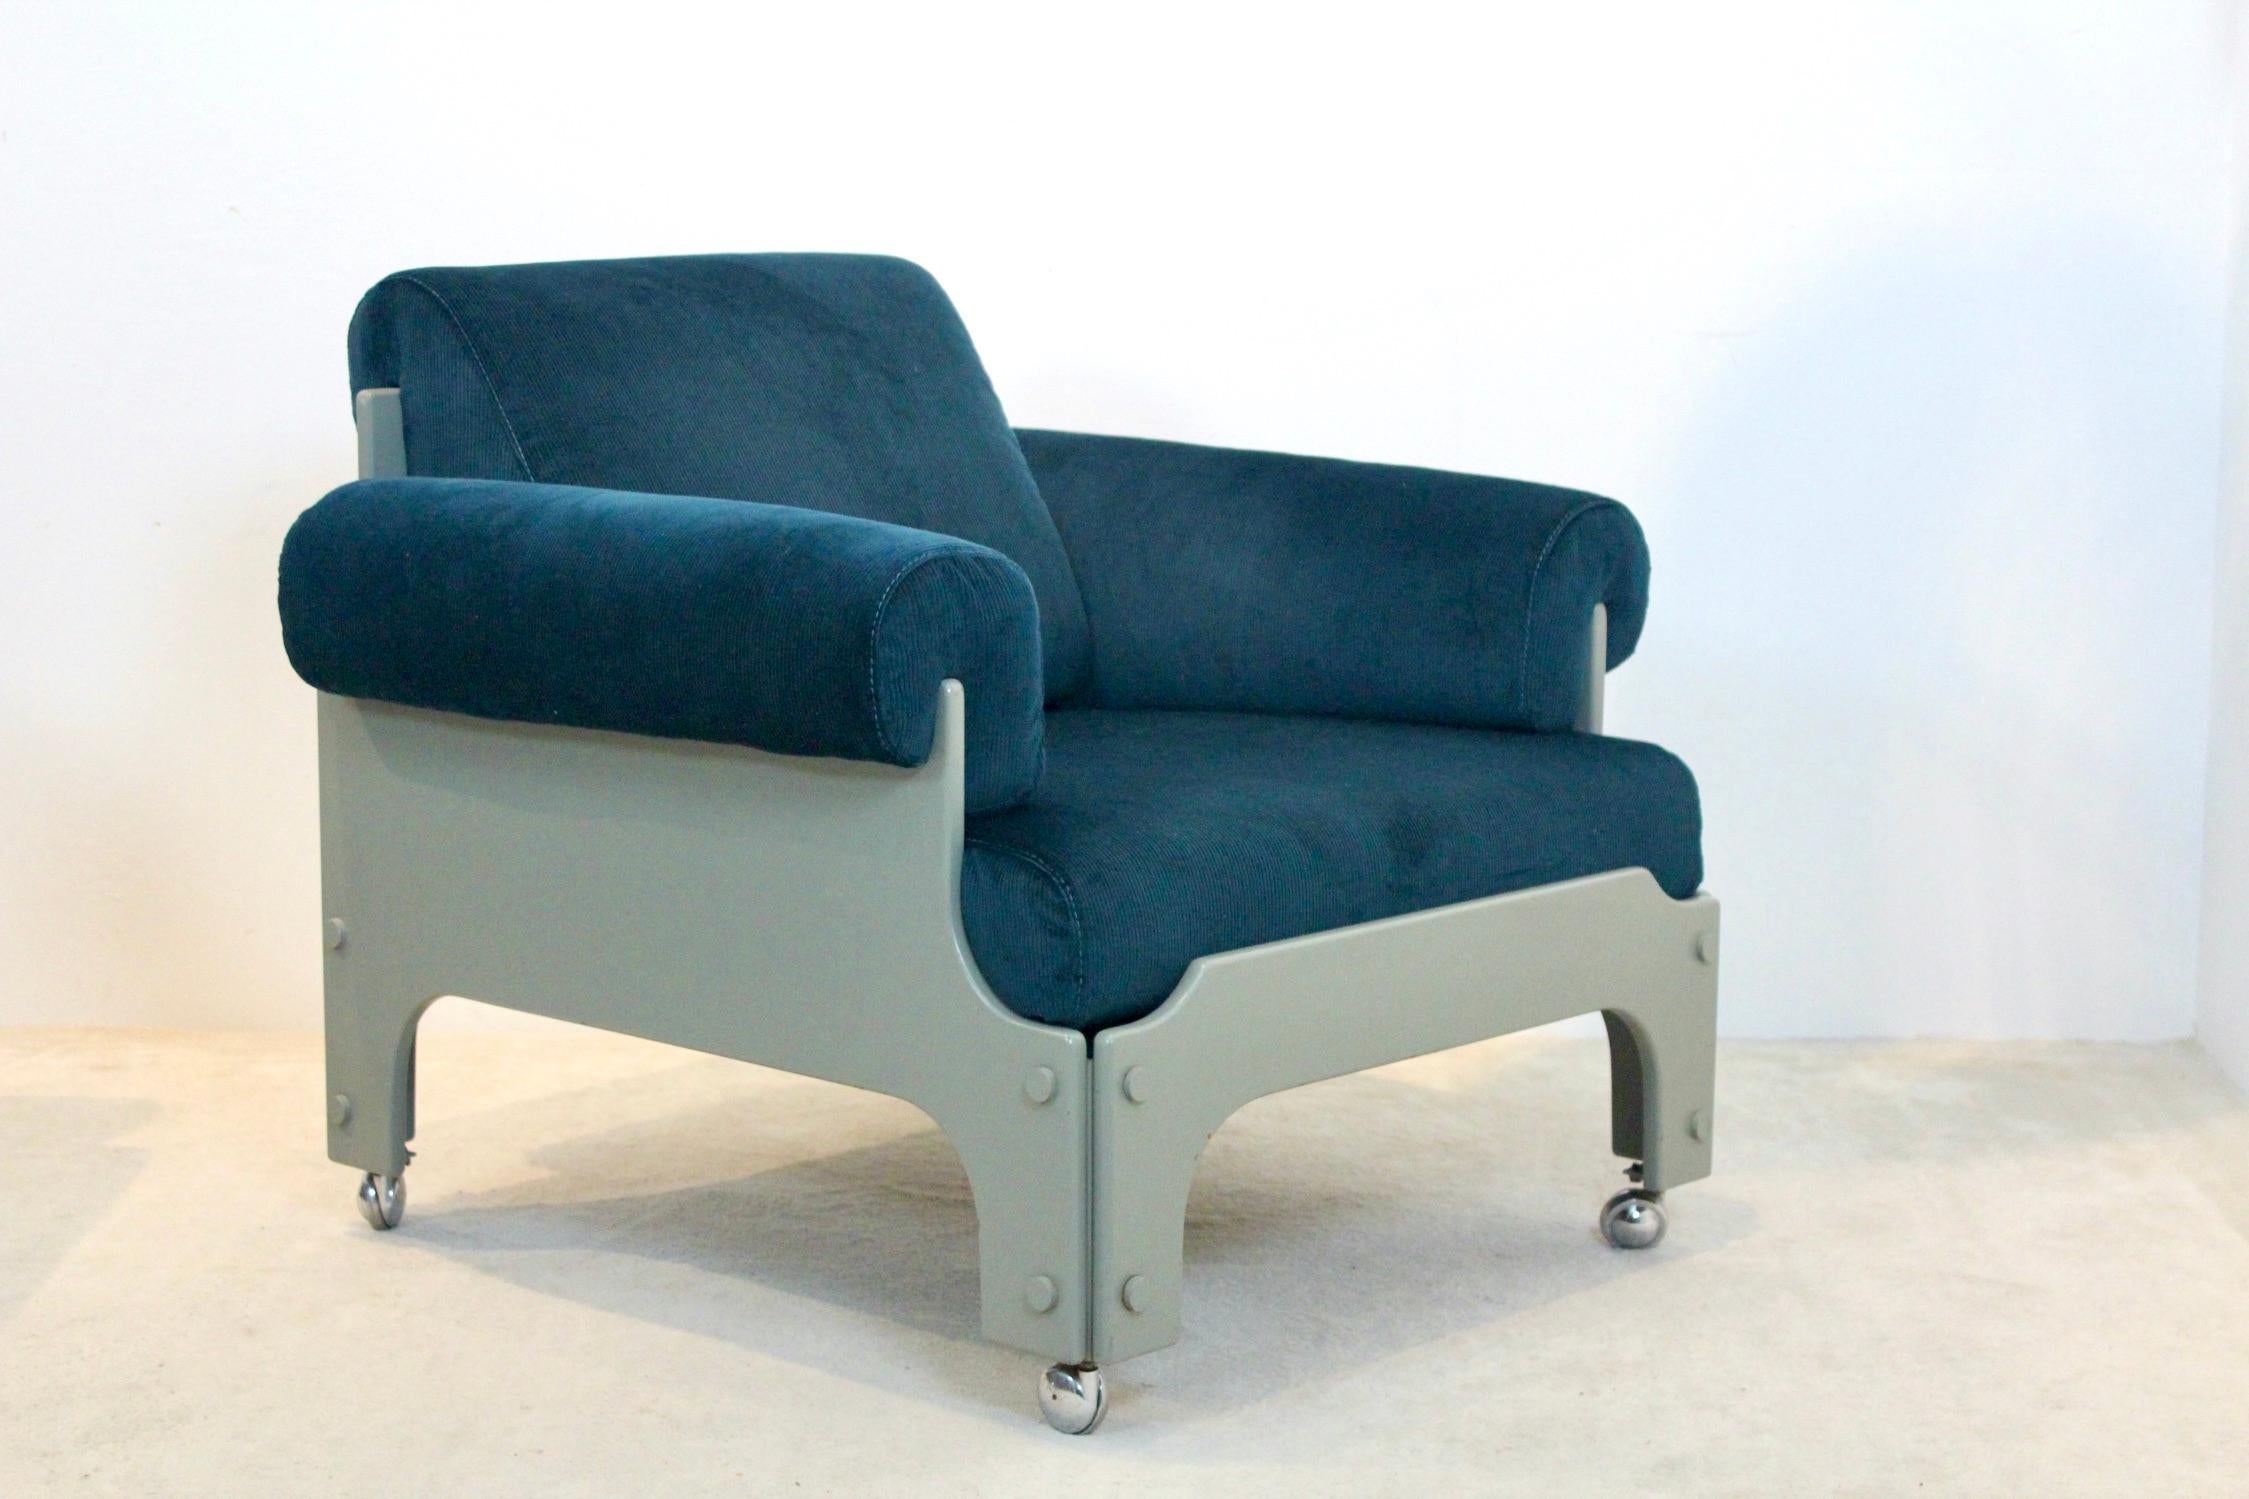 Mid-Century Modern Very Rare SZ 85 Spectrum Easy Chairs by Jan Pieter Berghoef, 1968 For Sale